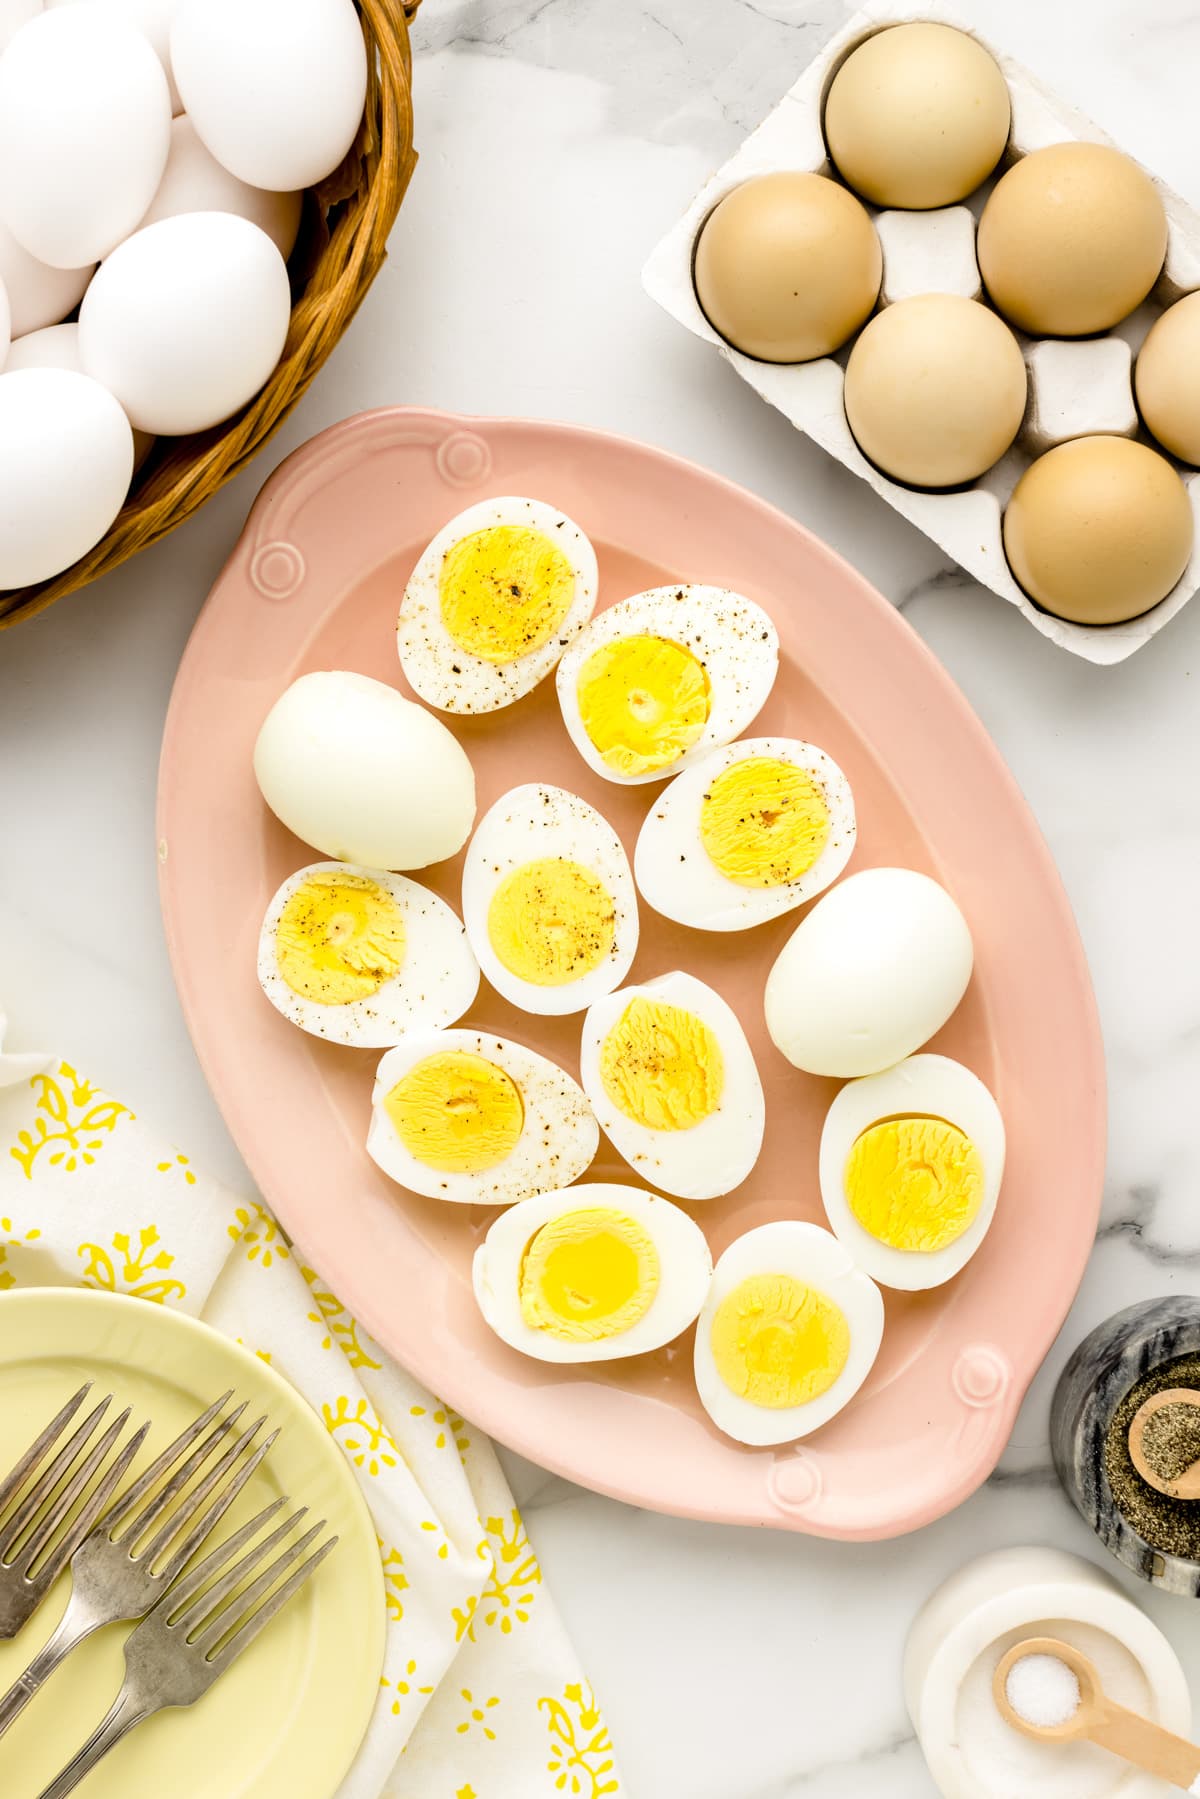 Easy peel hard boiled eggs placed on coral serving platter.